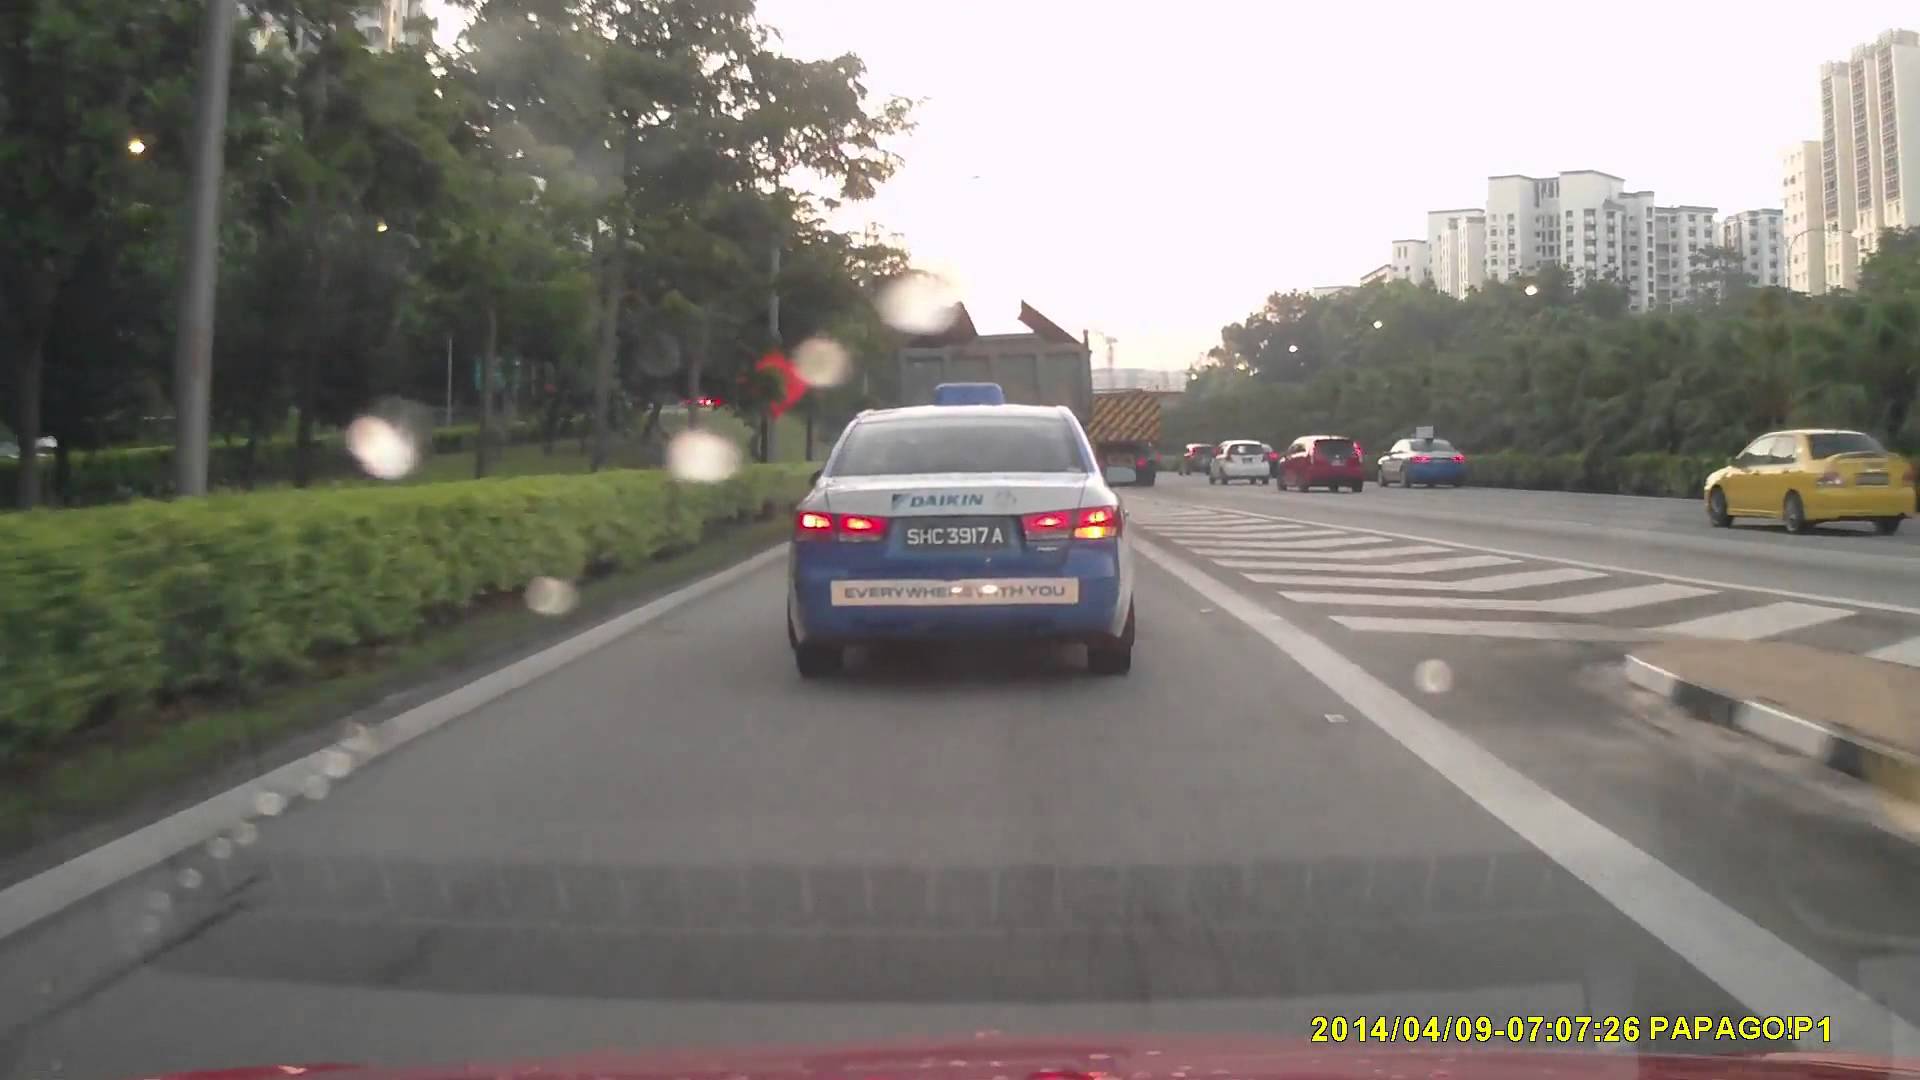 Reckless truck driver almost knock SG taxi!